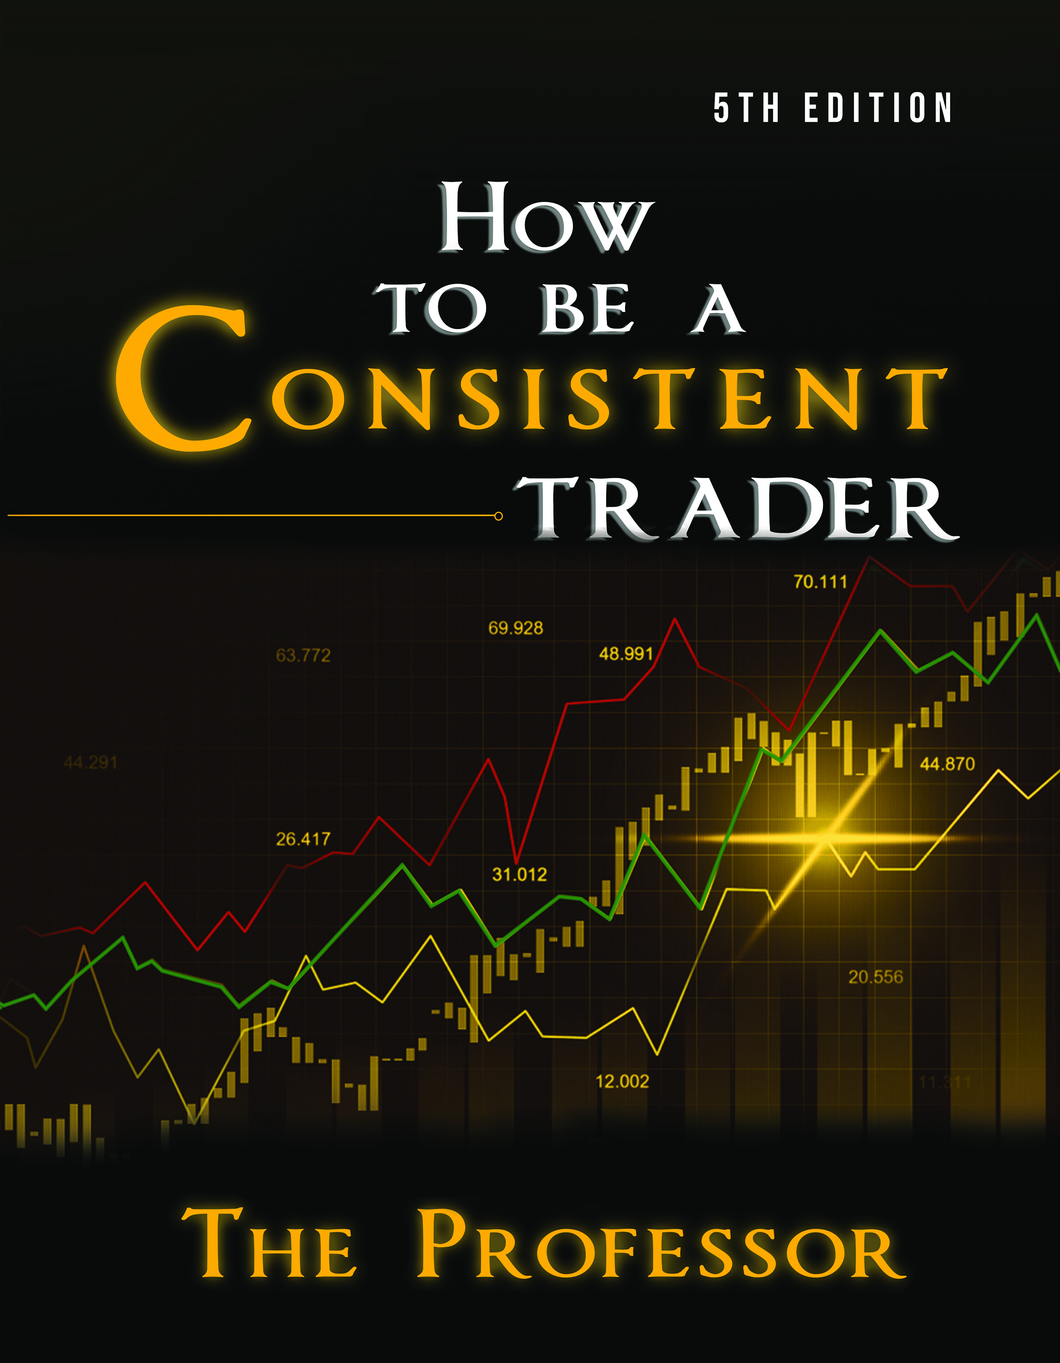 5th Digital Edition - How To Be A Consistent Trader By Day Trade Professor